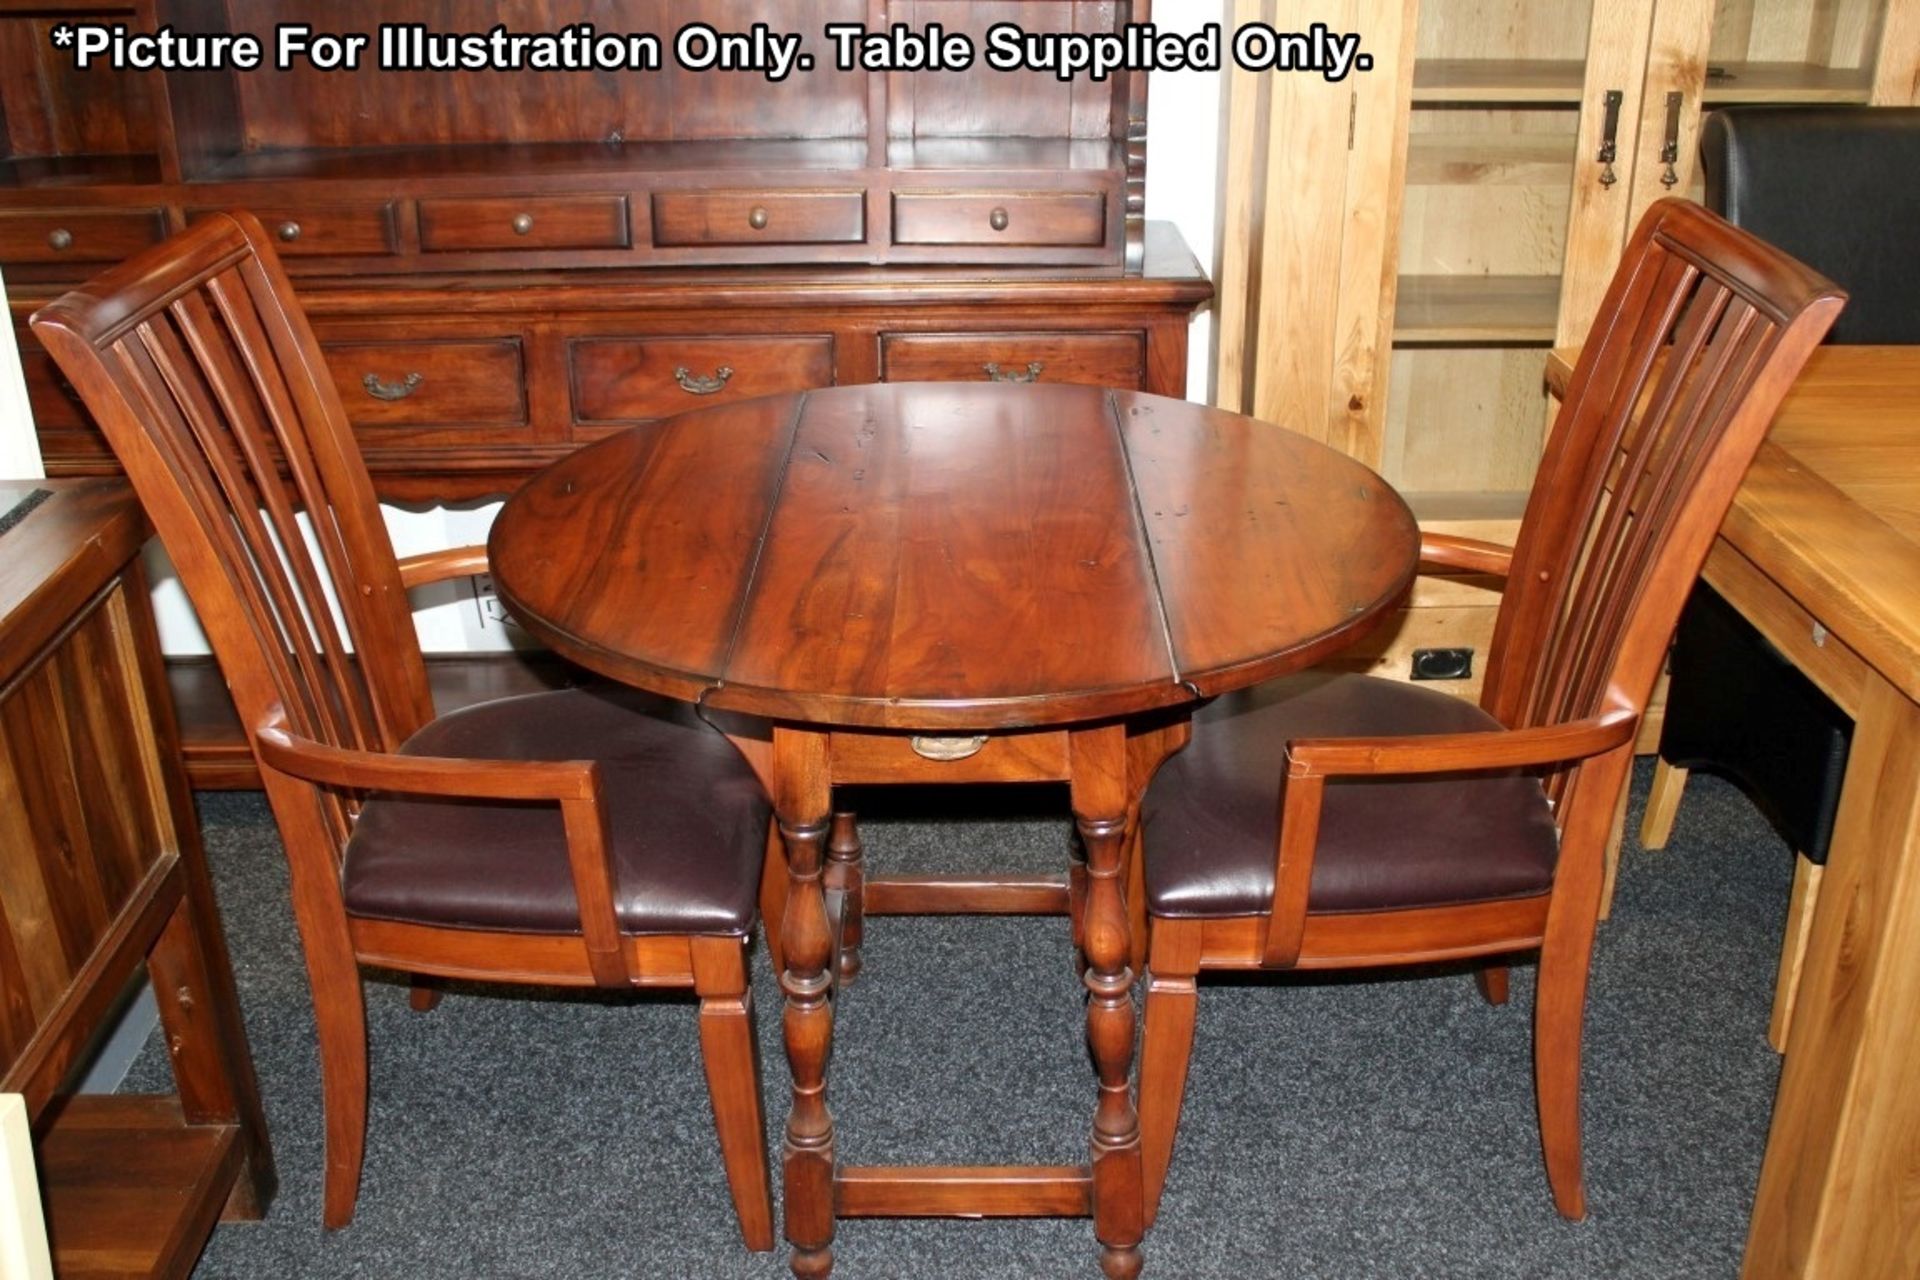 1 x Mark Webster "Burlington" Solid Wood Gate Leg Extending Table With 2-Drawers + 2-Folds - Diamete - Image 2 of 14